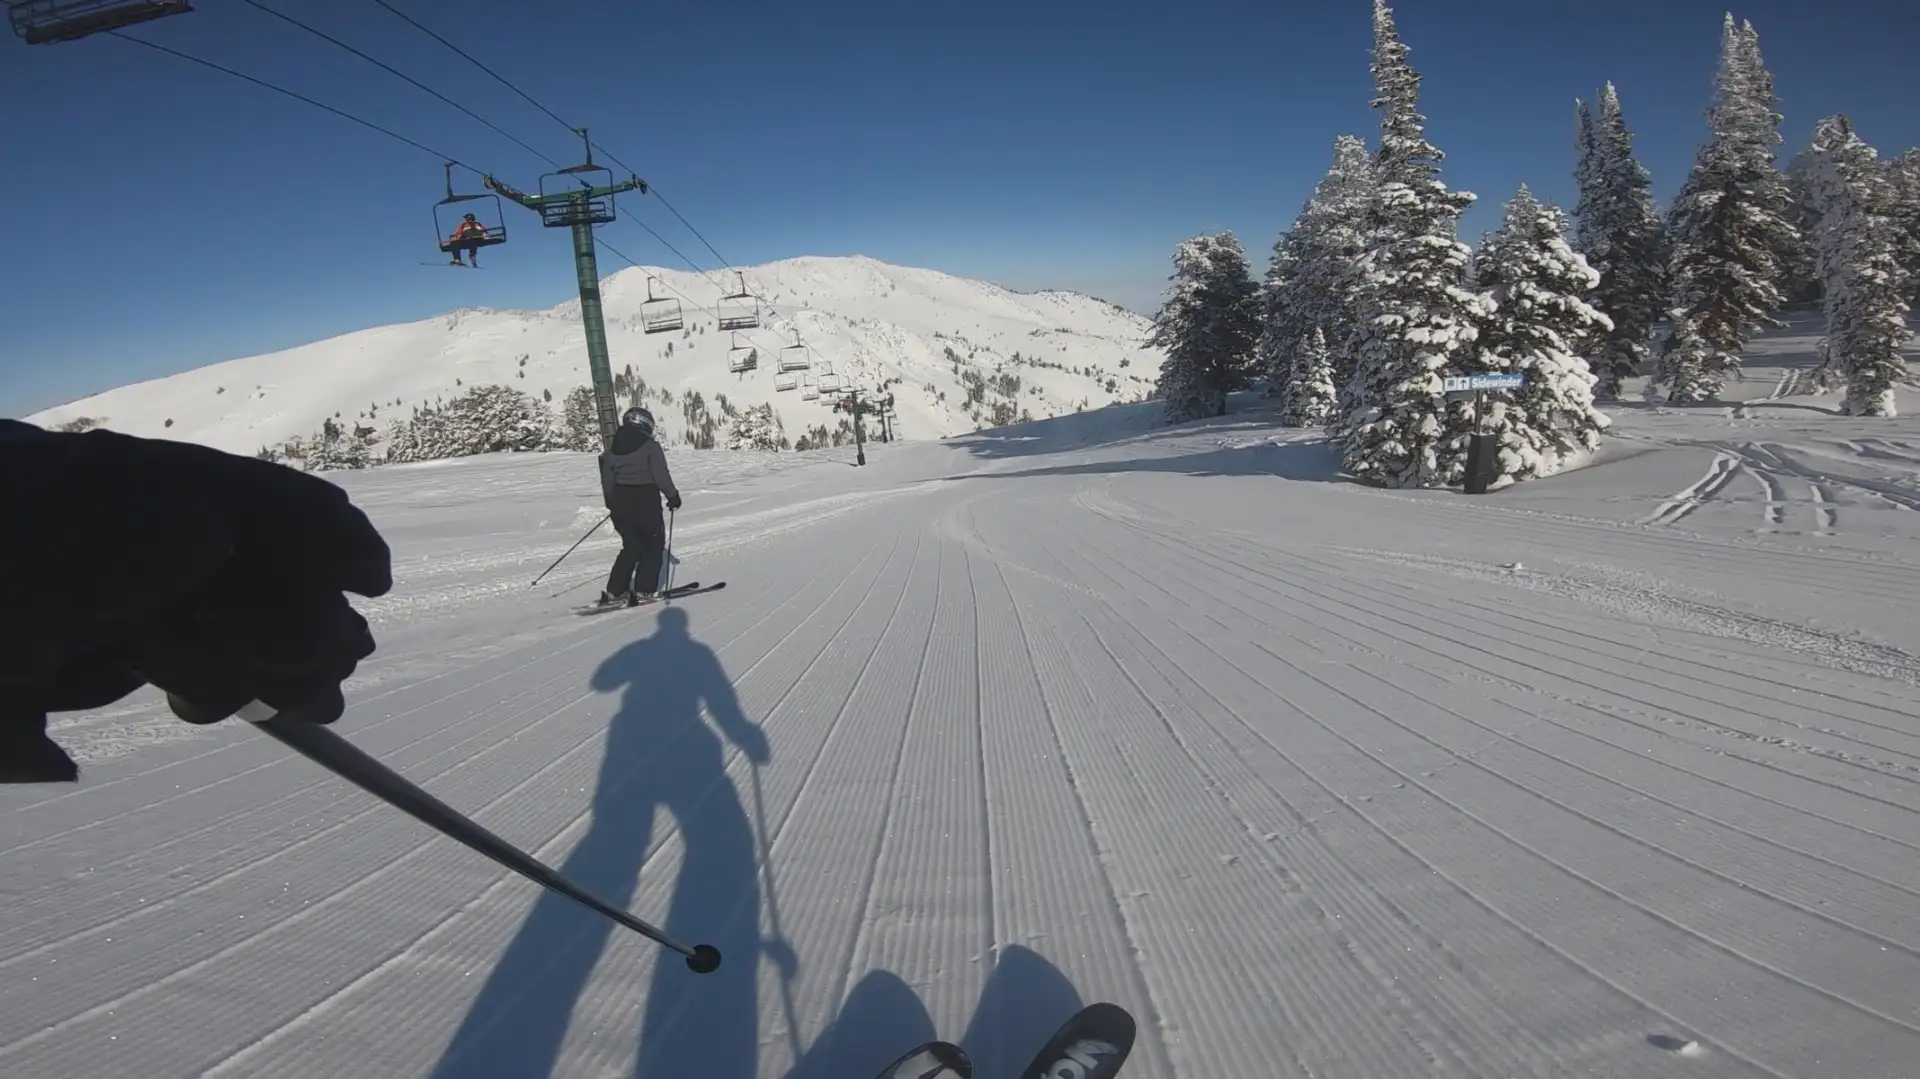 Ripping down some milky-smooth groomers at Powder Mountain